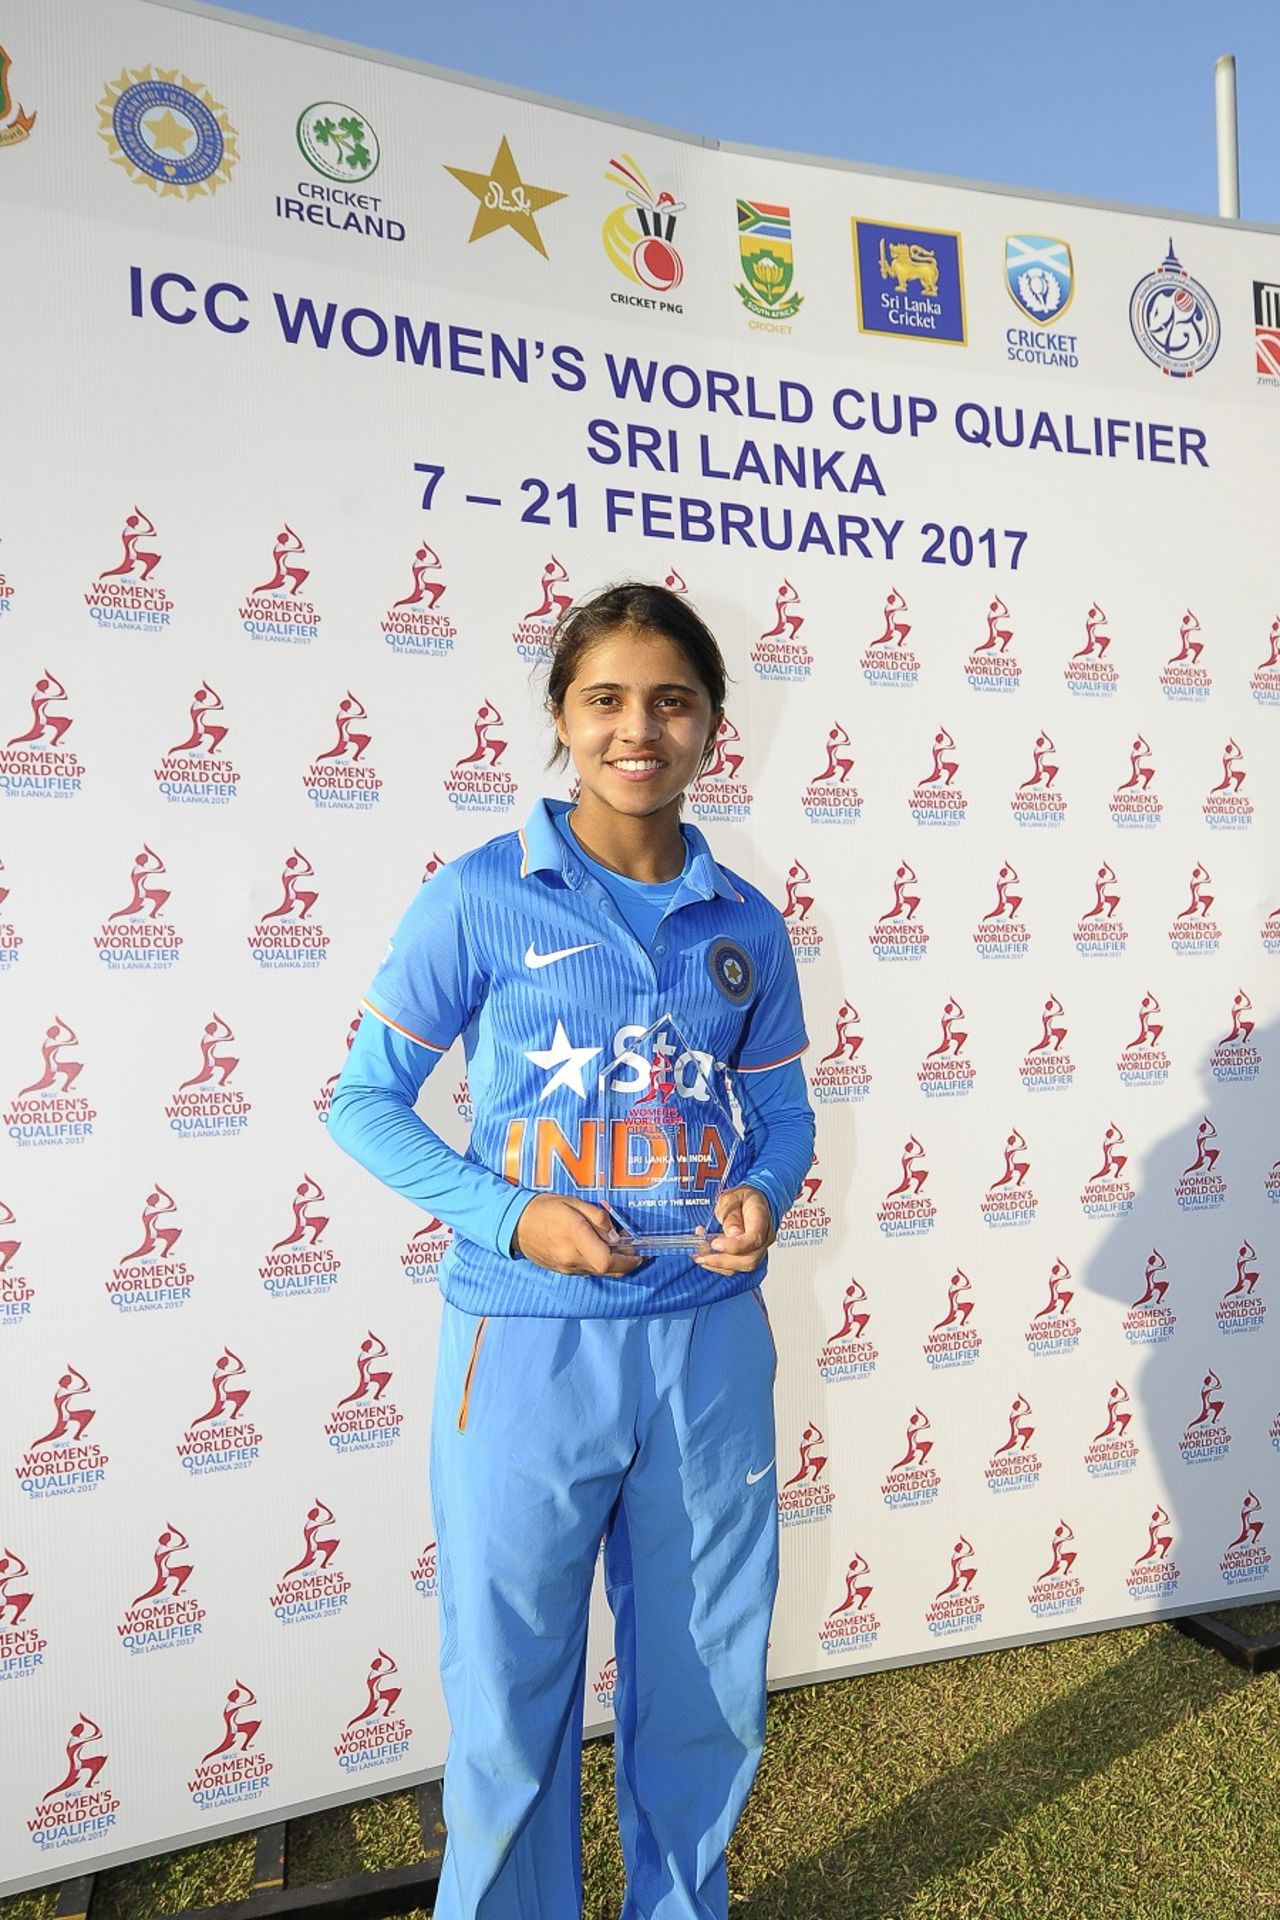 Devika Vaidya was Player of the Match in her second ODI, India v Sri Lanka, Women's World Cup Qualifier 2017, Colombo, February 7, 2017